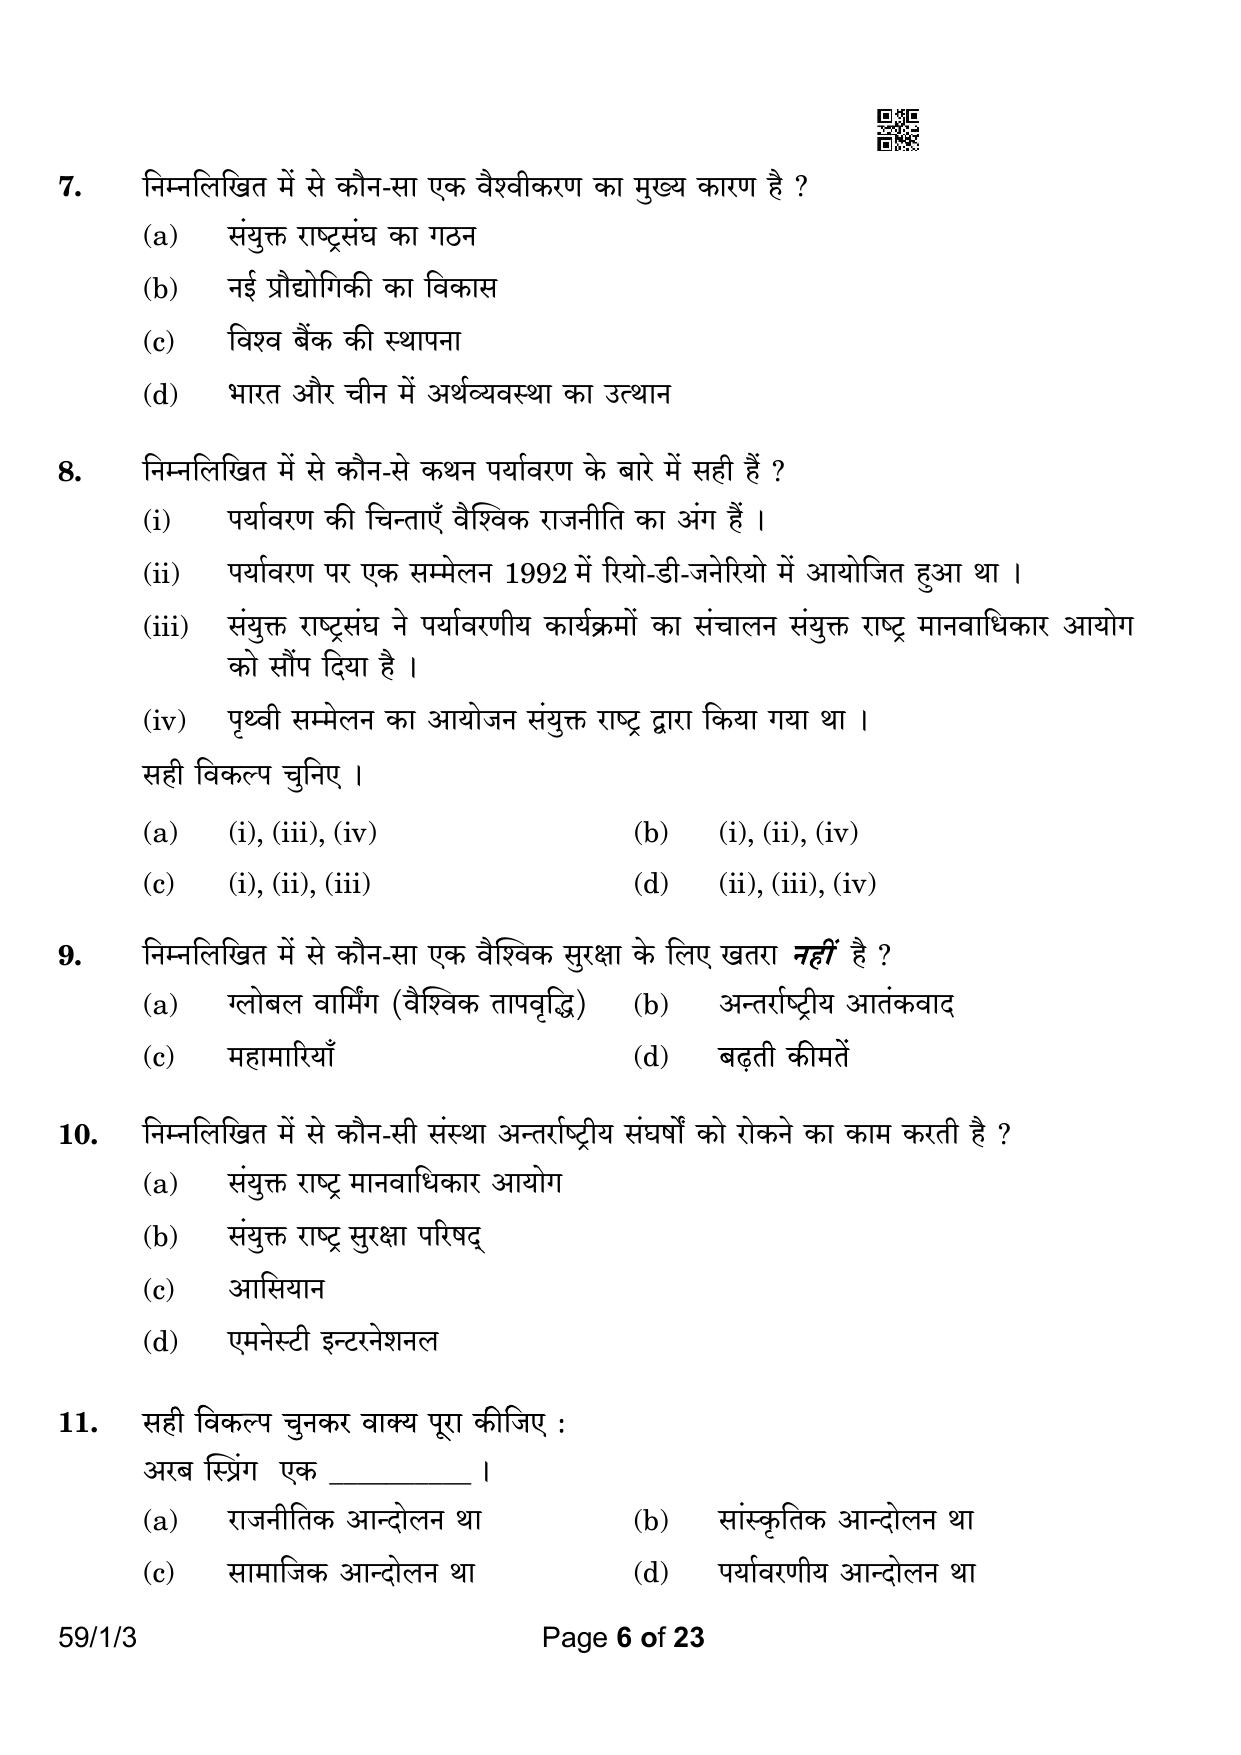 CBSE Class 12 59-1-3 Political Science 2023 Question Paper - Page 6